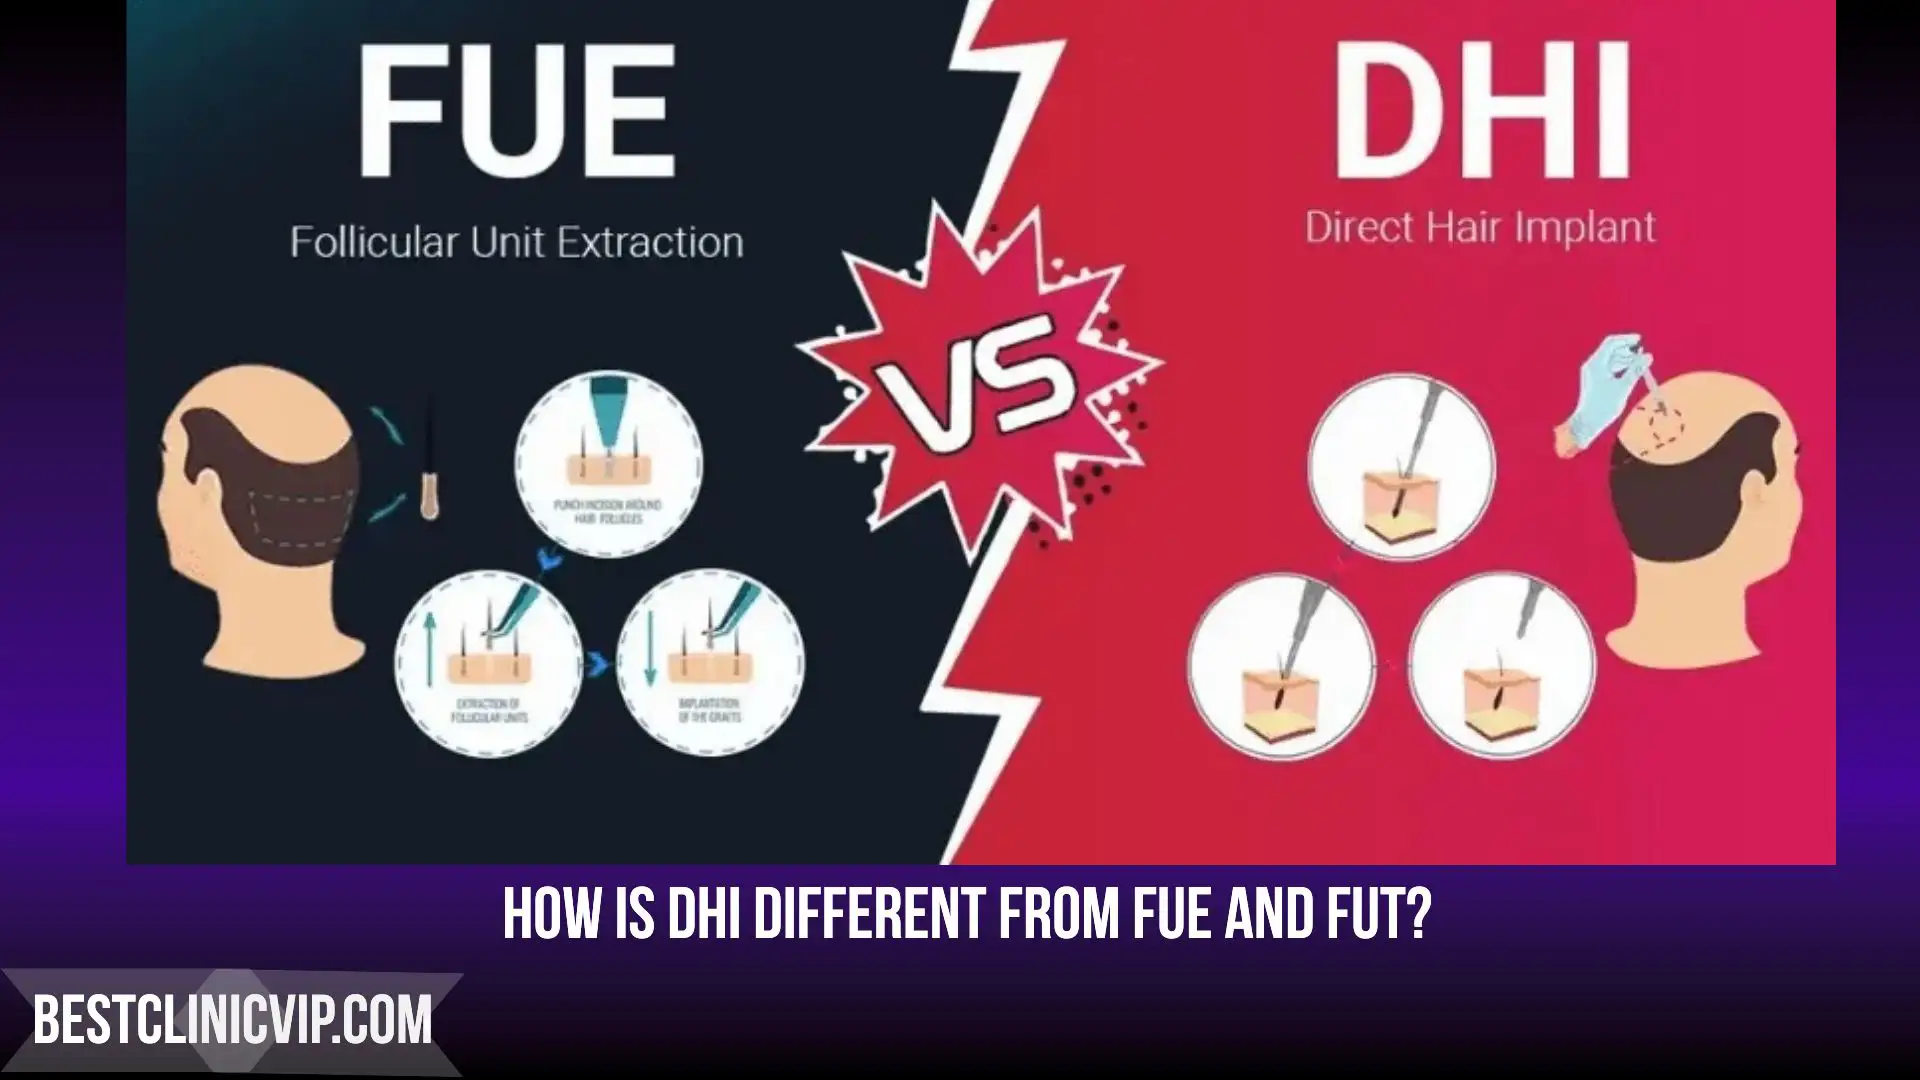 How is DHI different from FUE and FUT